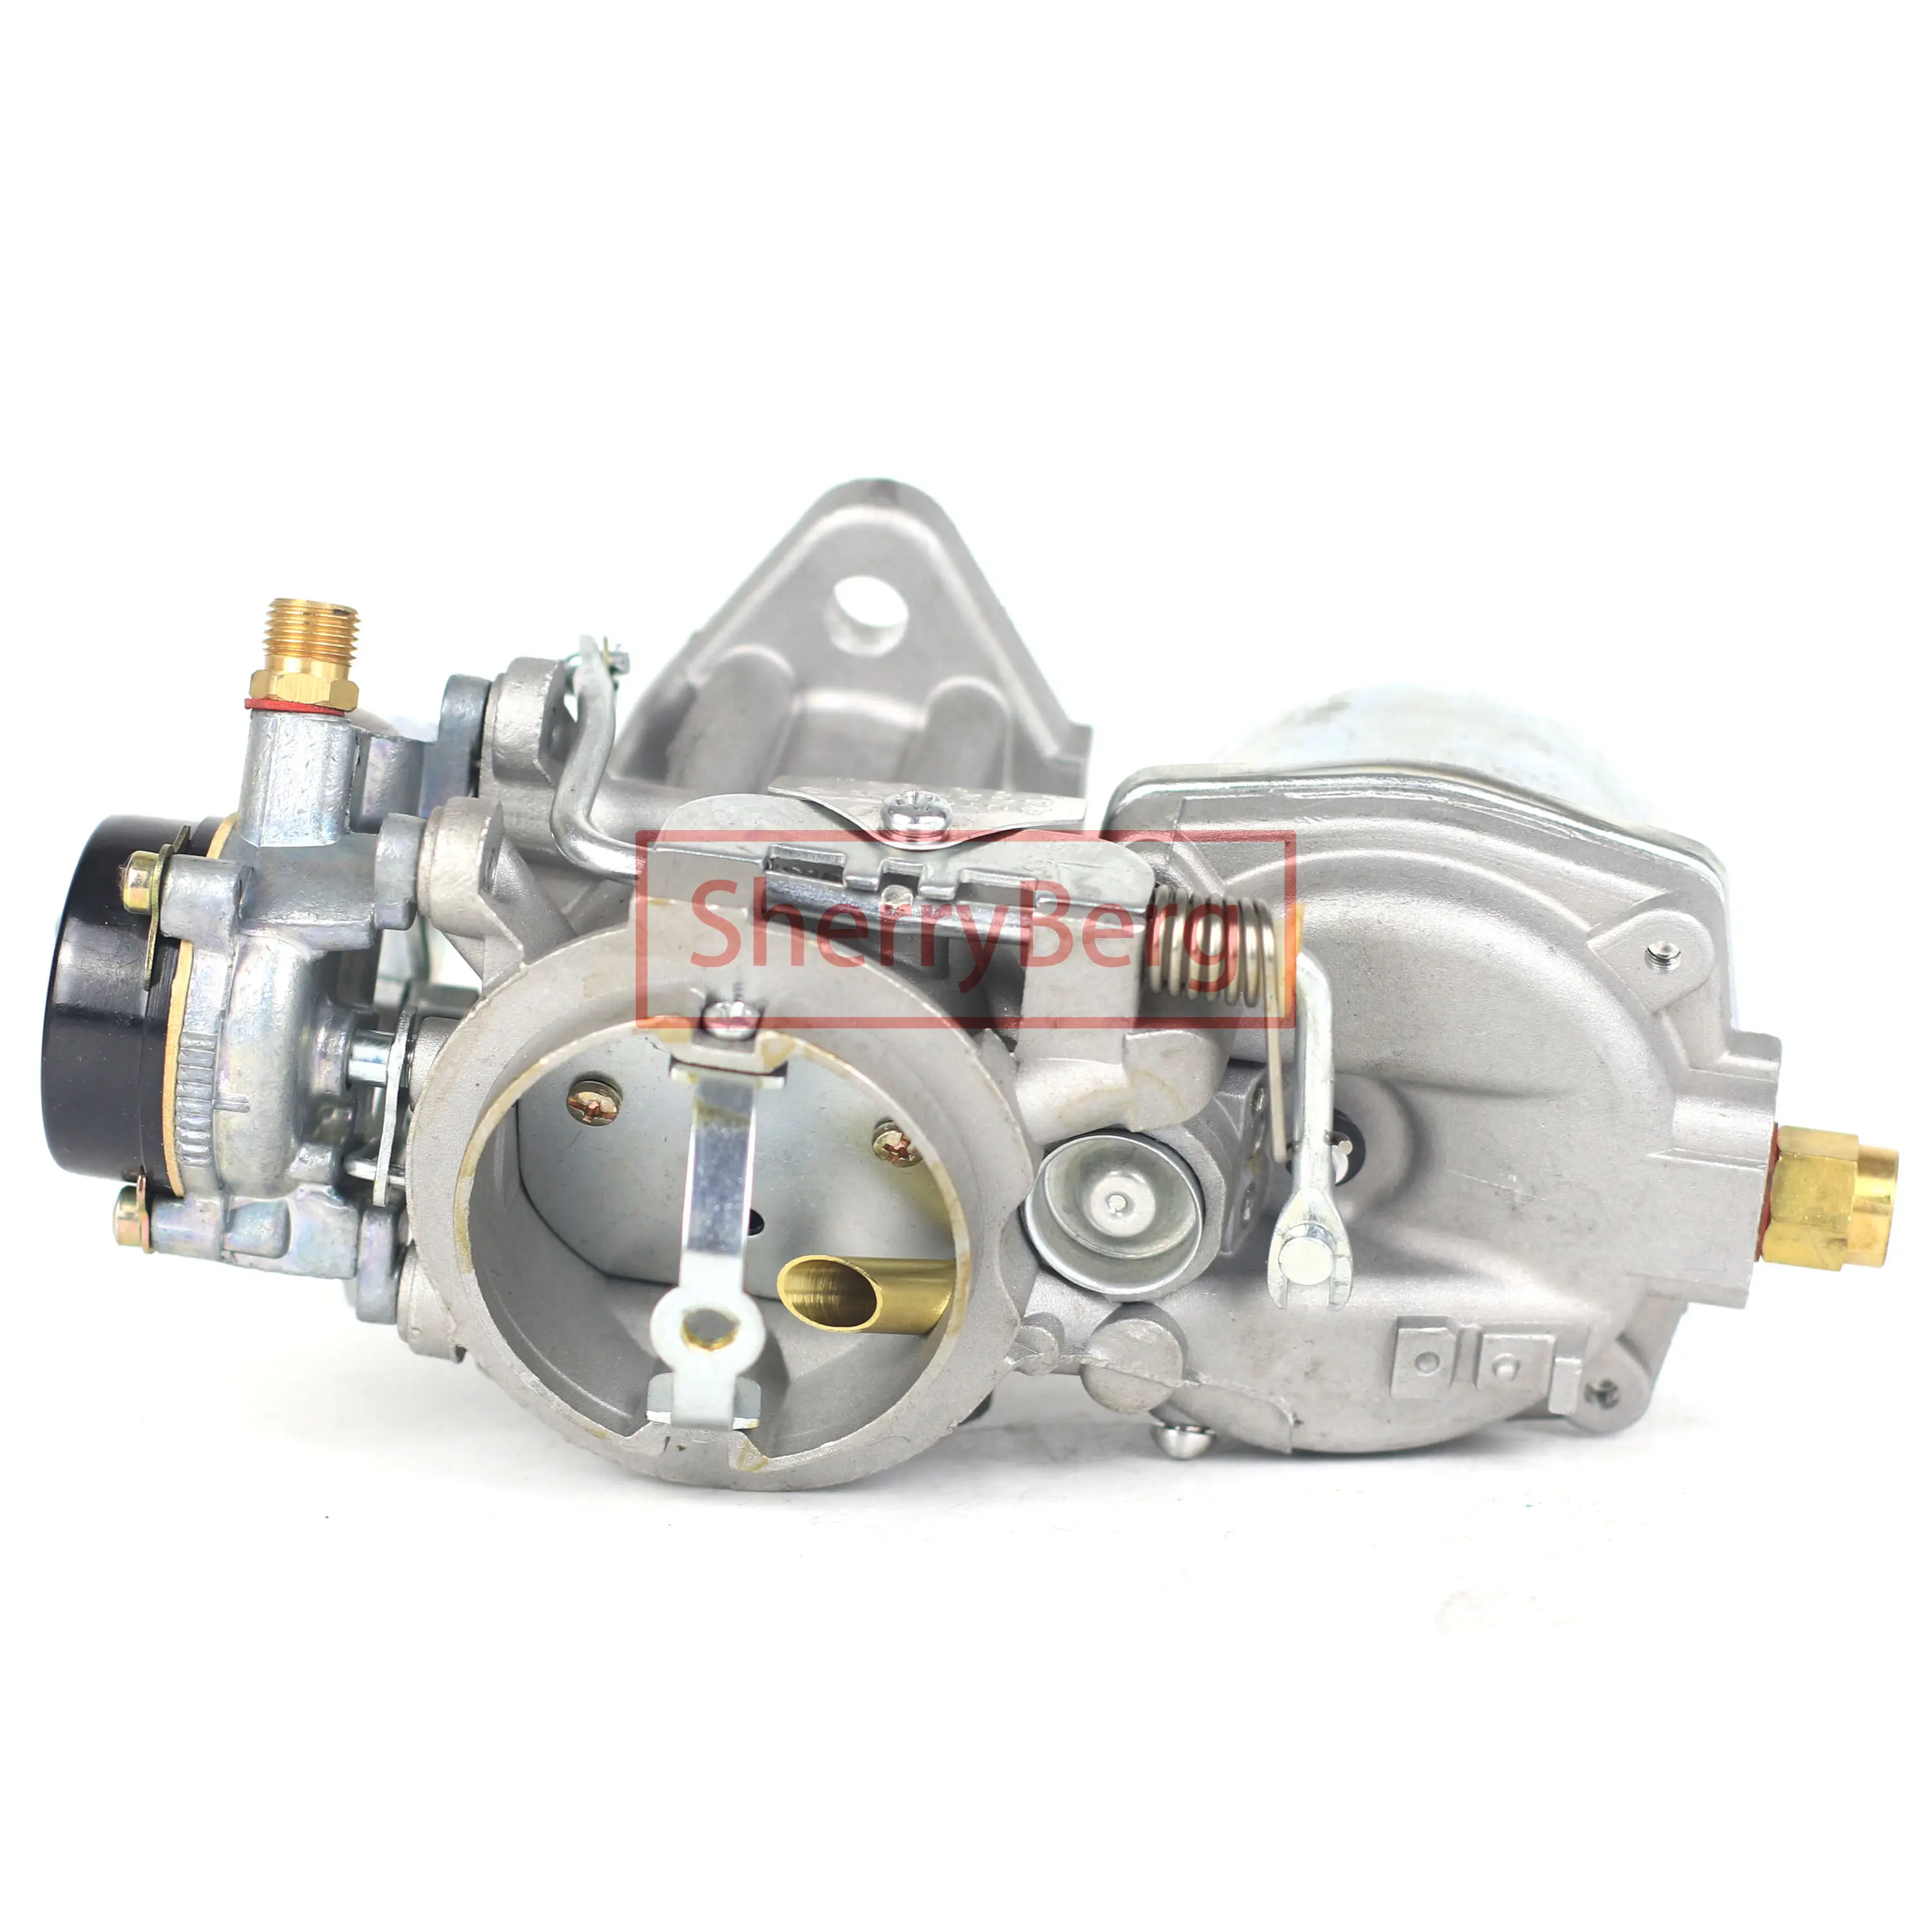 SherryBerg ROS 1970 CARB carb per FORD FAIRLANE MUSTANG 250 A/T CARTER RBS carburatore 4784s vergaser nuovo